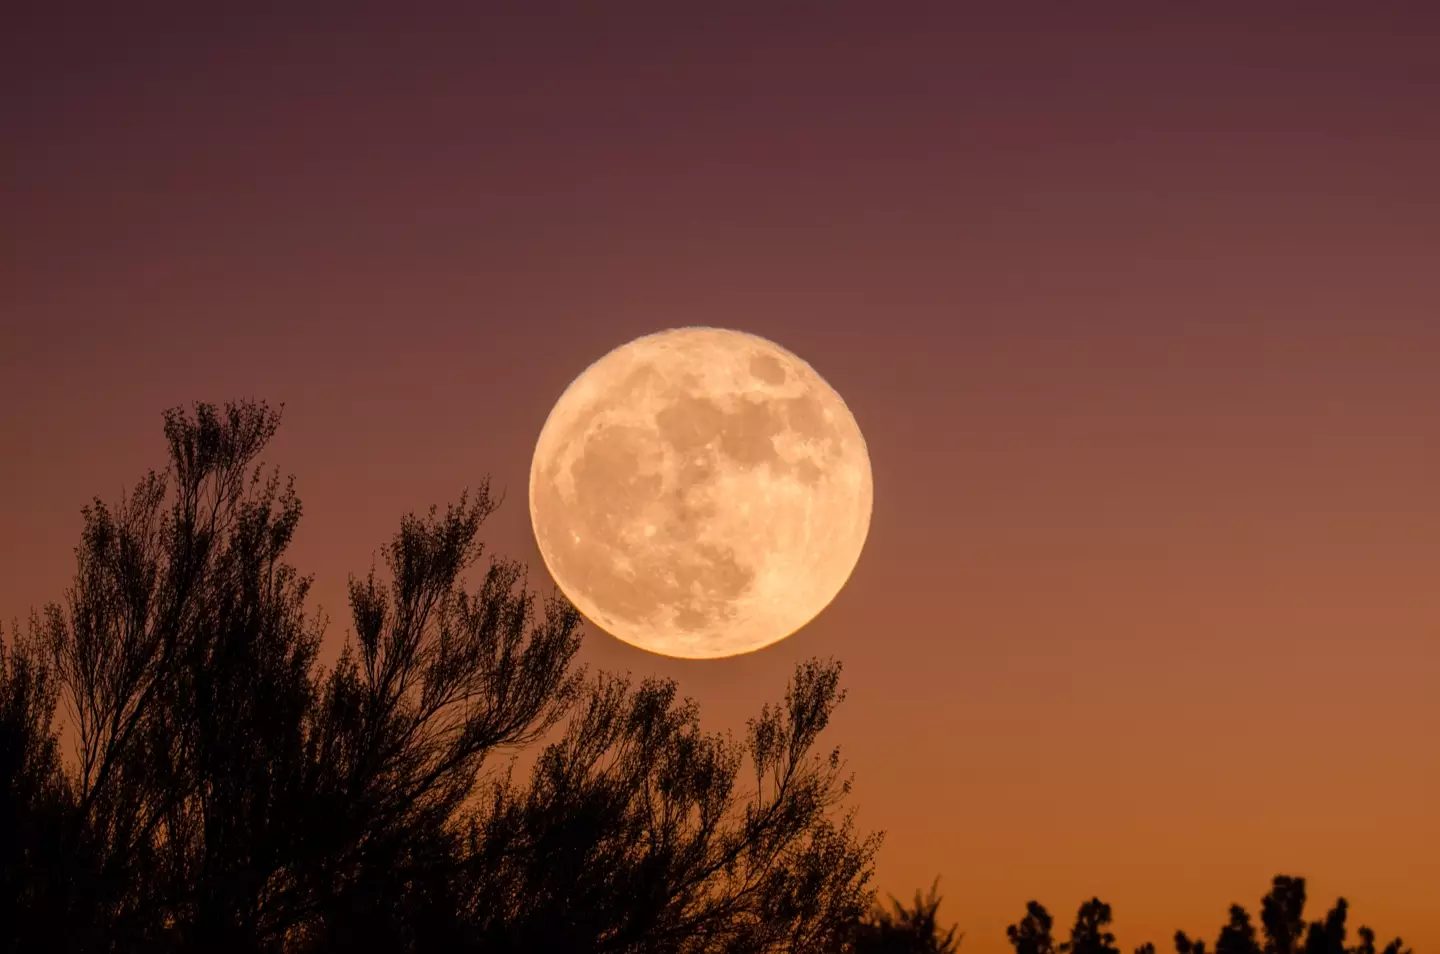 It has been said throughout history that a full moon can impact our mood (